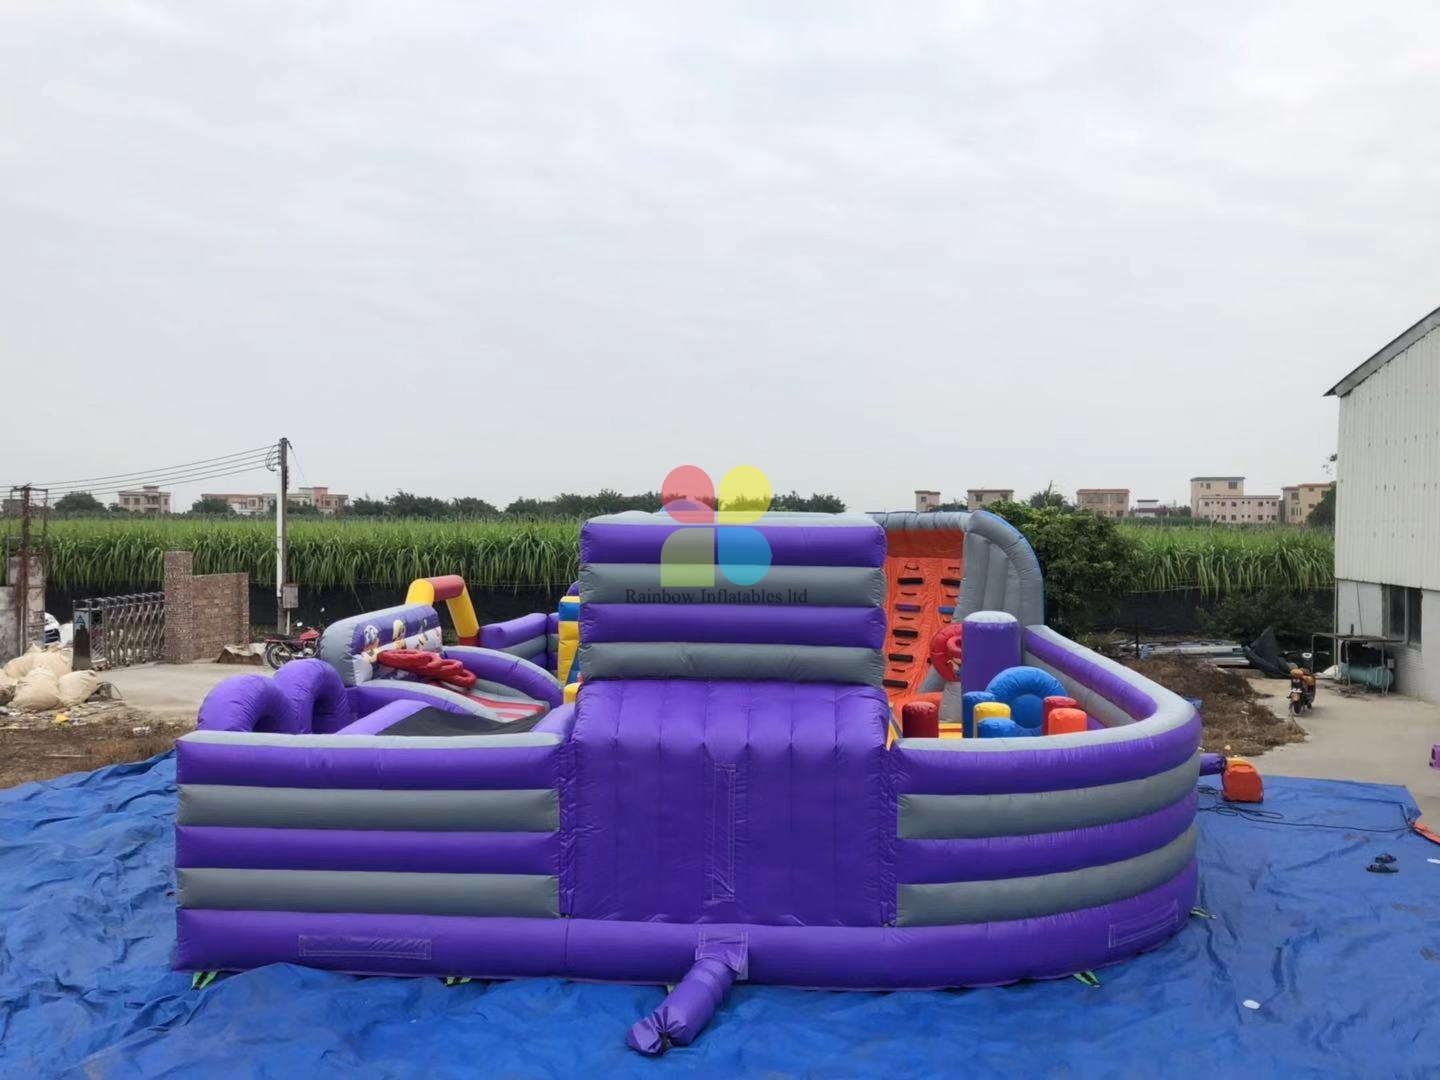 Indoor Inflatable Theme Park for Toddlers